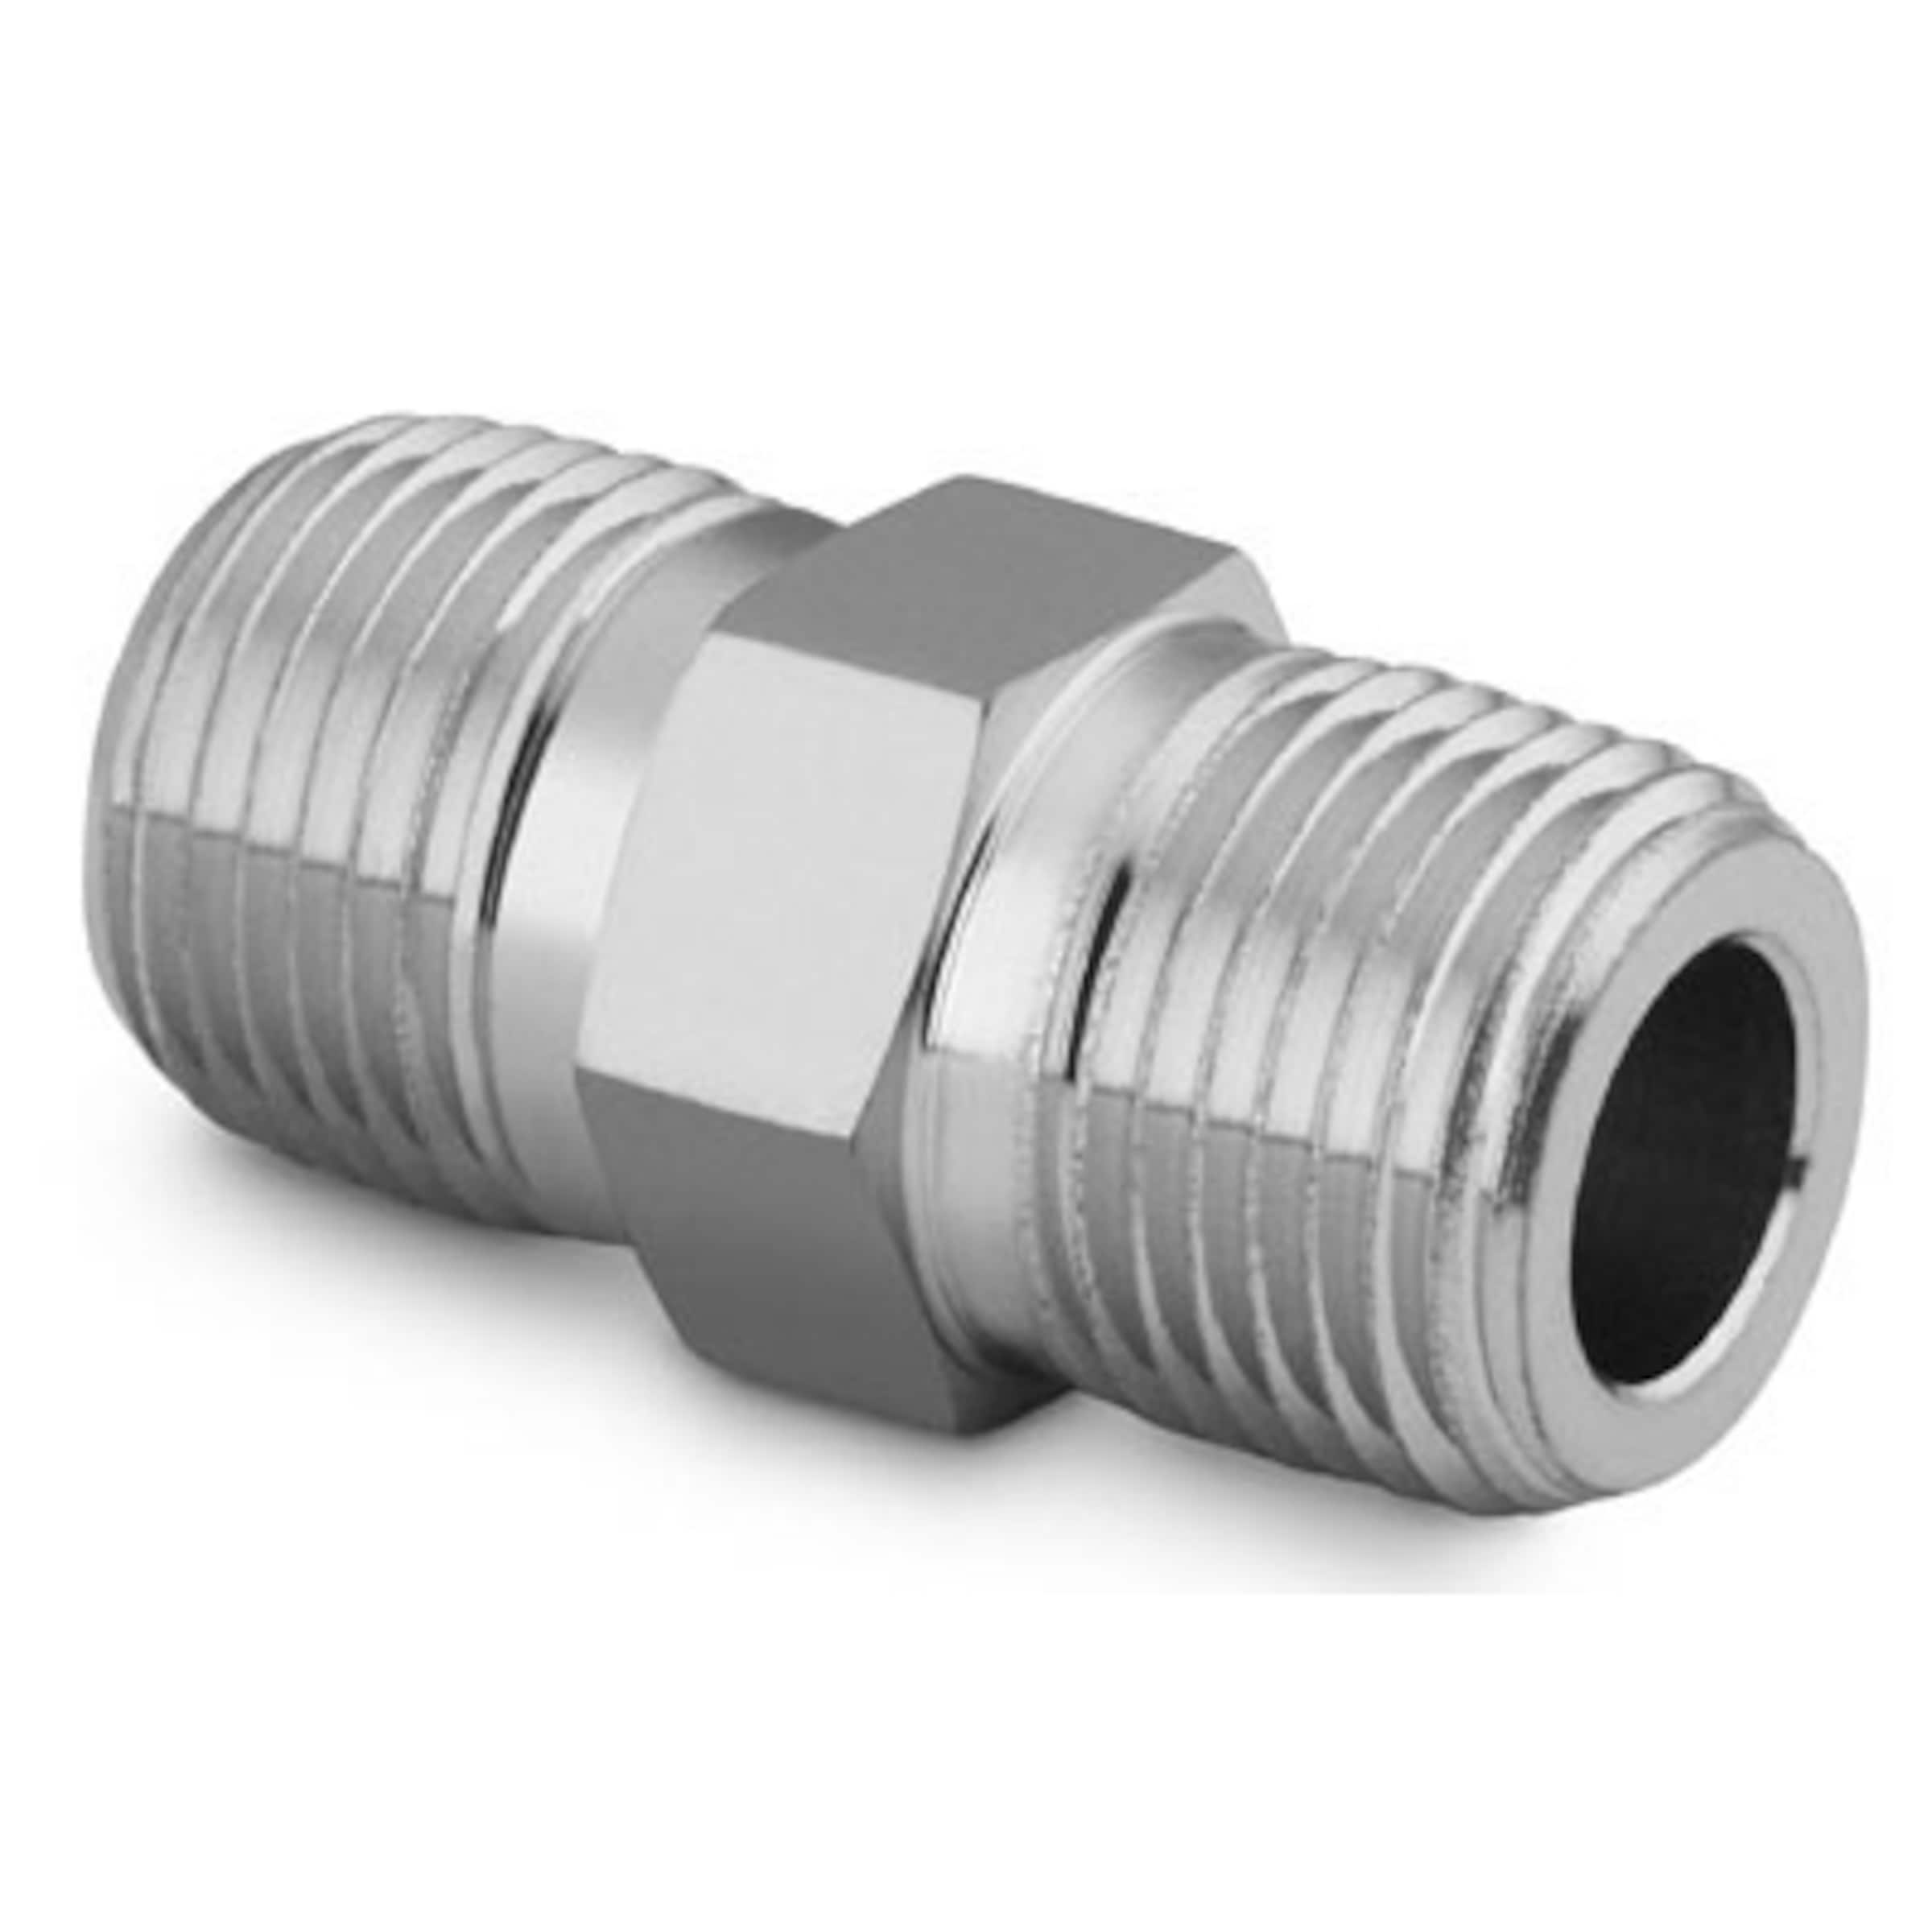 Details about  / CPI Fittings /& Valves Male Hex Nipple ⅛ X ⅛ inch Pipe Size